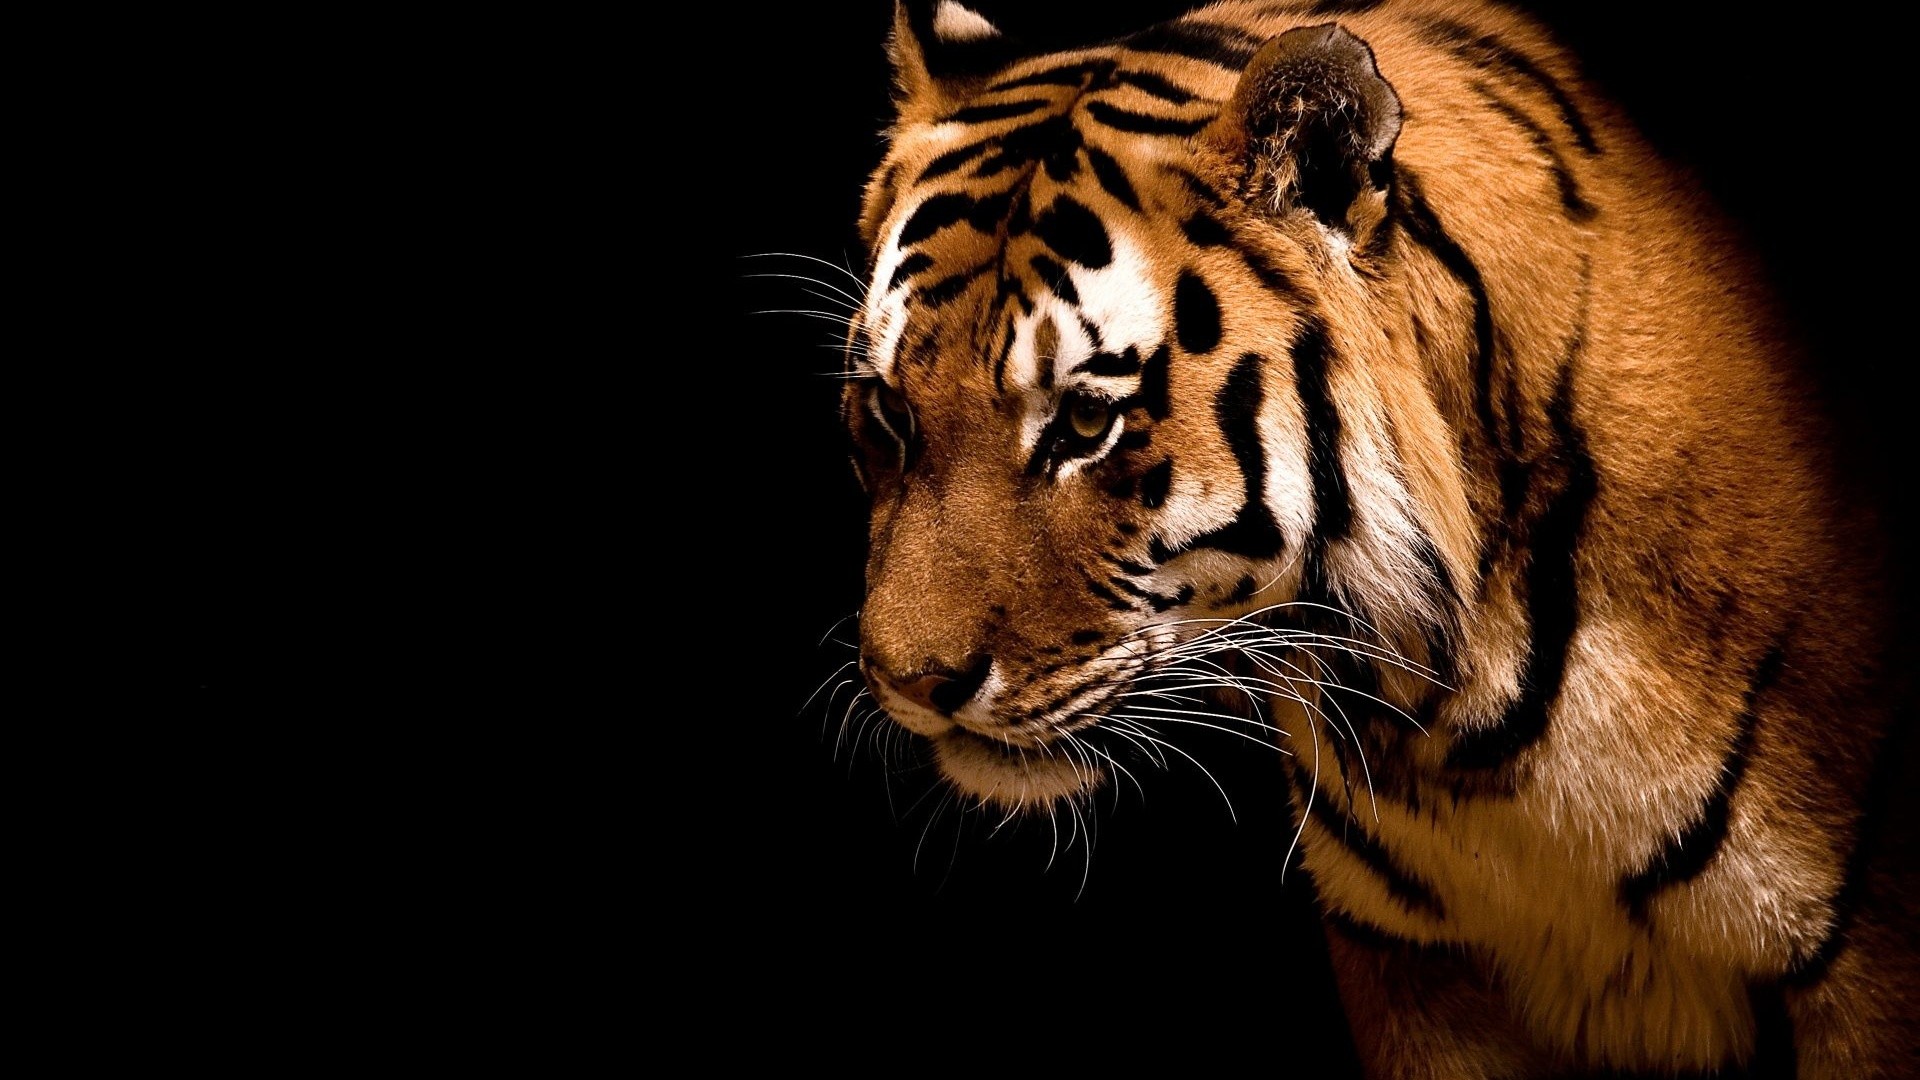 1920x1080  Tiger in the dark. How to set wallpaper on your desktop? Click  the download link from above and set the wallpaper on the desktop from your  OS.